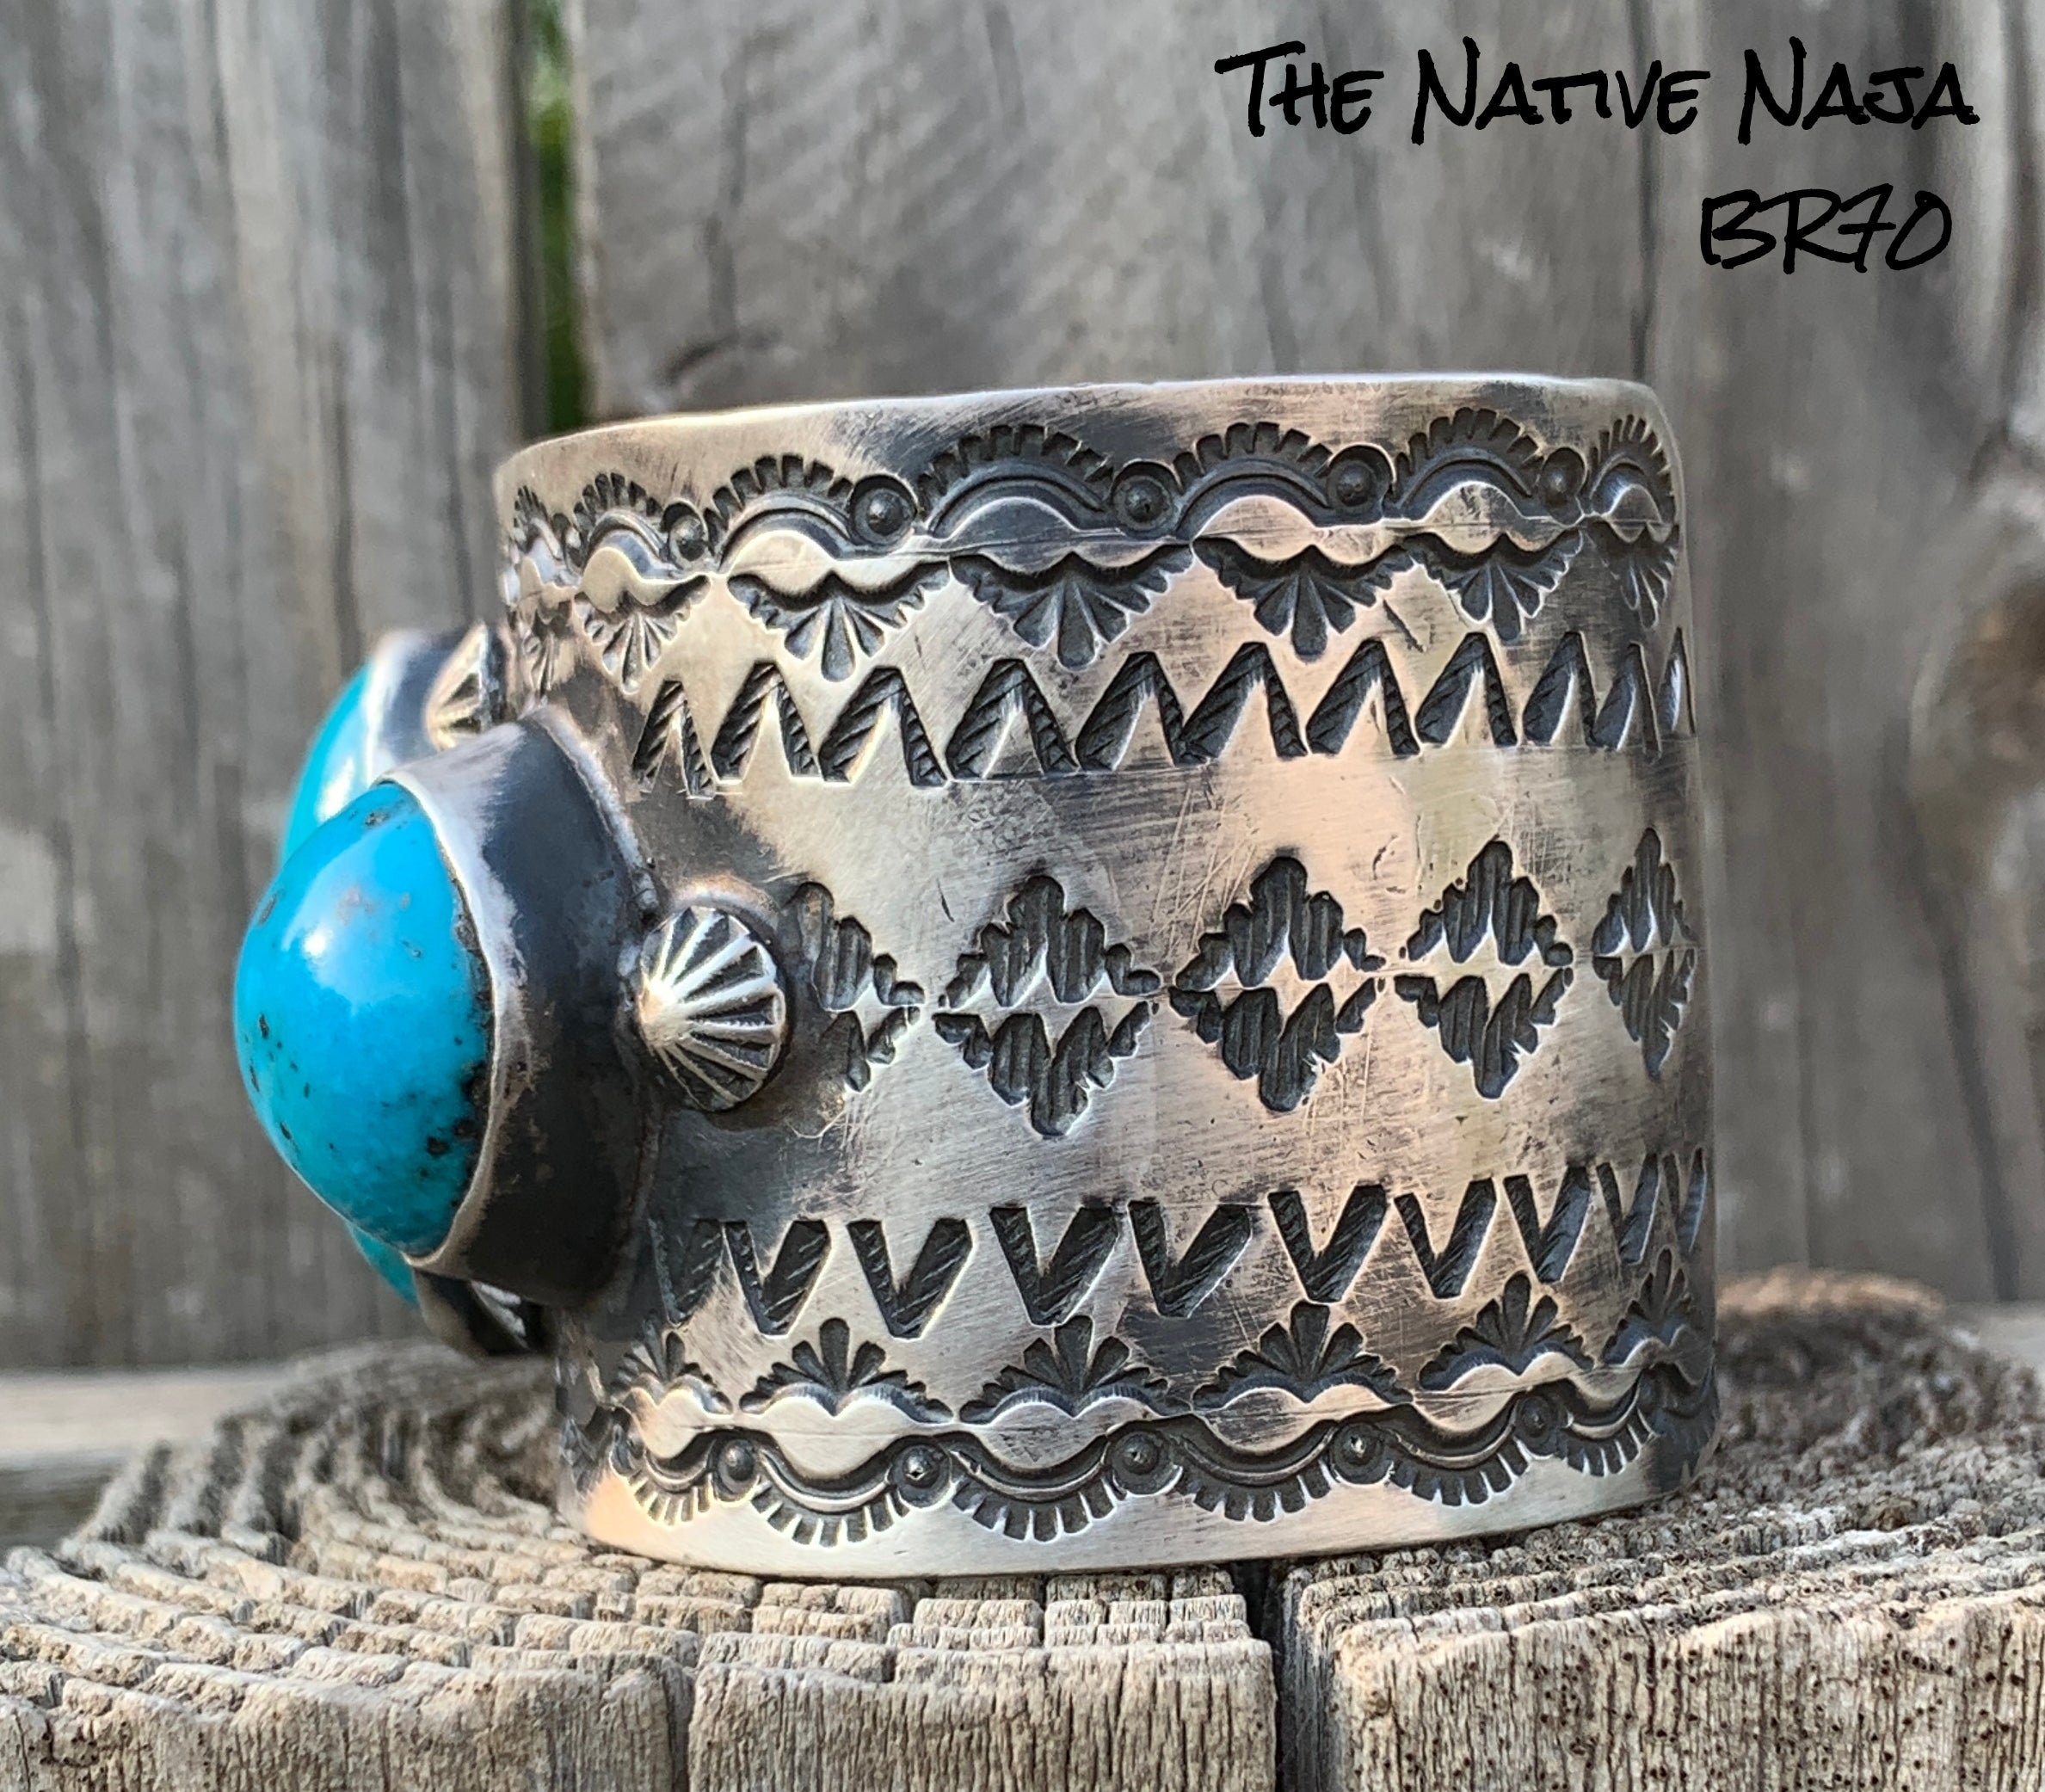 Navajo Chimney Butte LRG 3 Stone Turquoise & Sterling Silver Cuff Bracelet BR70